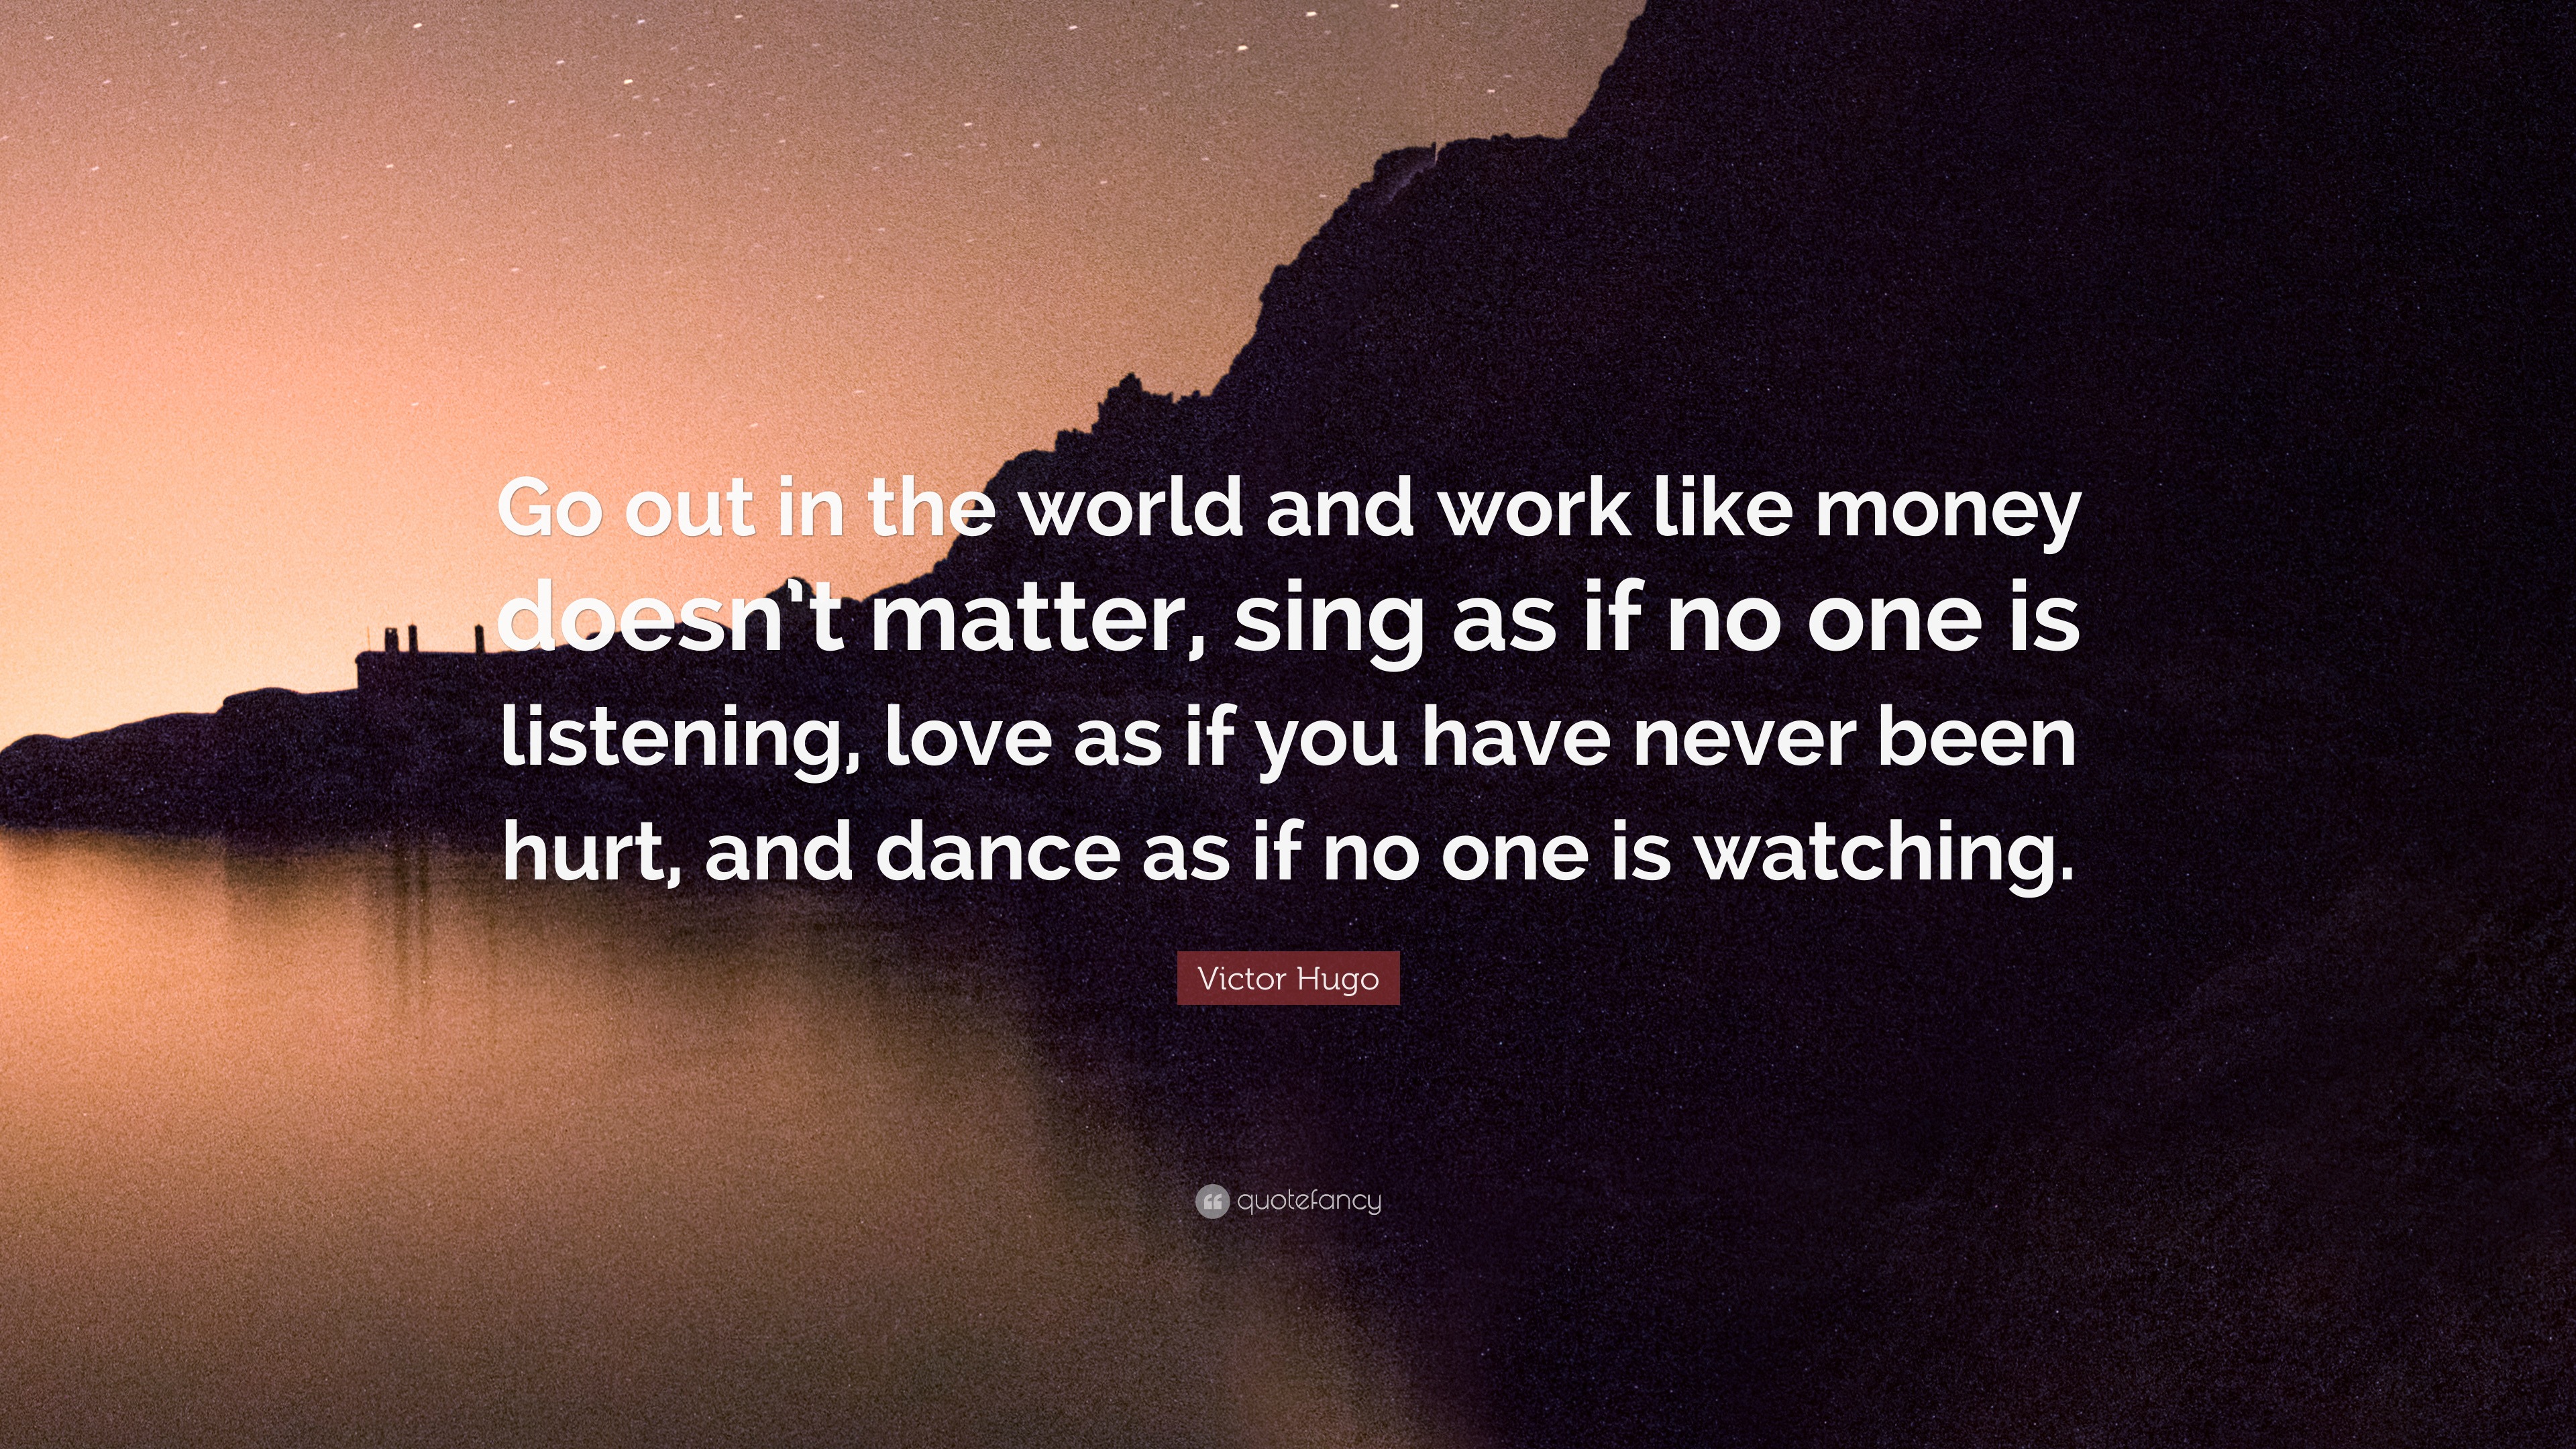 Victor Hugo Quote “Go out in the world and work like money doesn